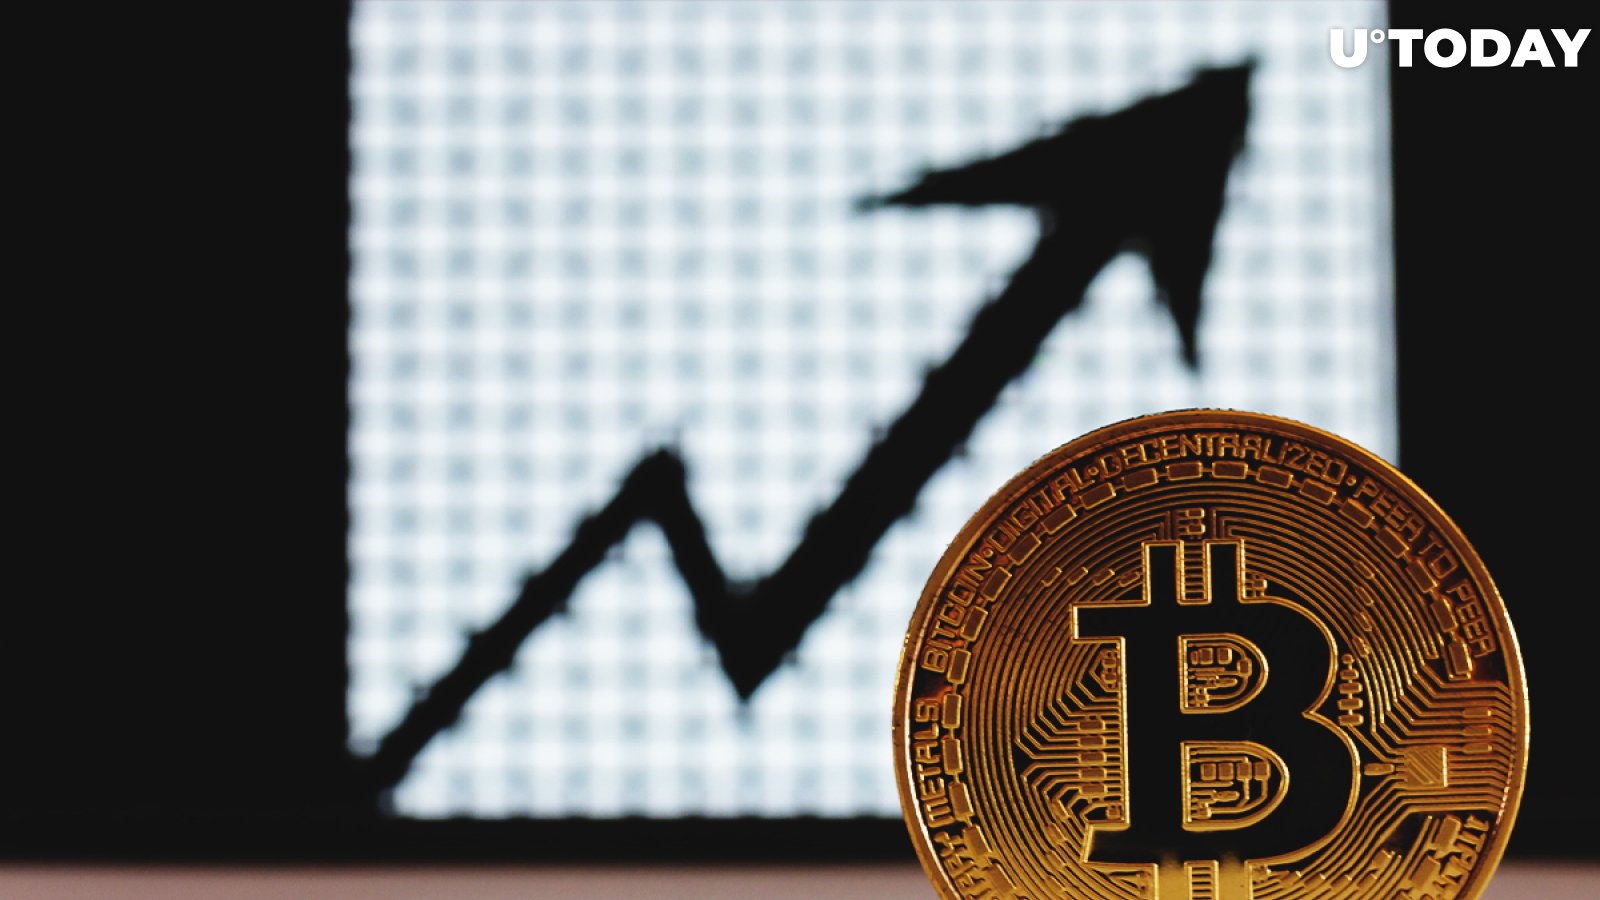  5 Reasons Why Bitcoin Surpasses $50,000 First Time Since May: CryptoQuant Data